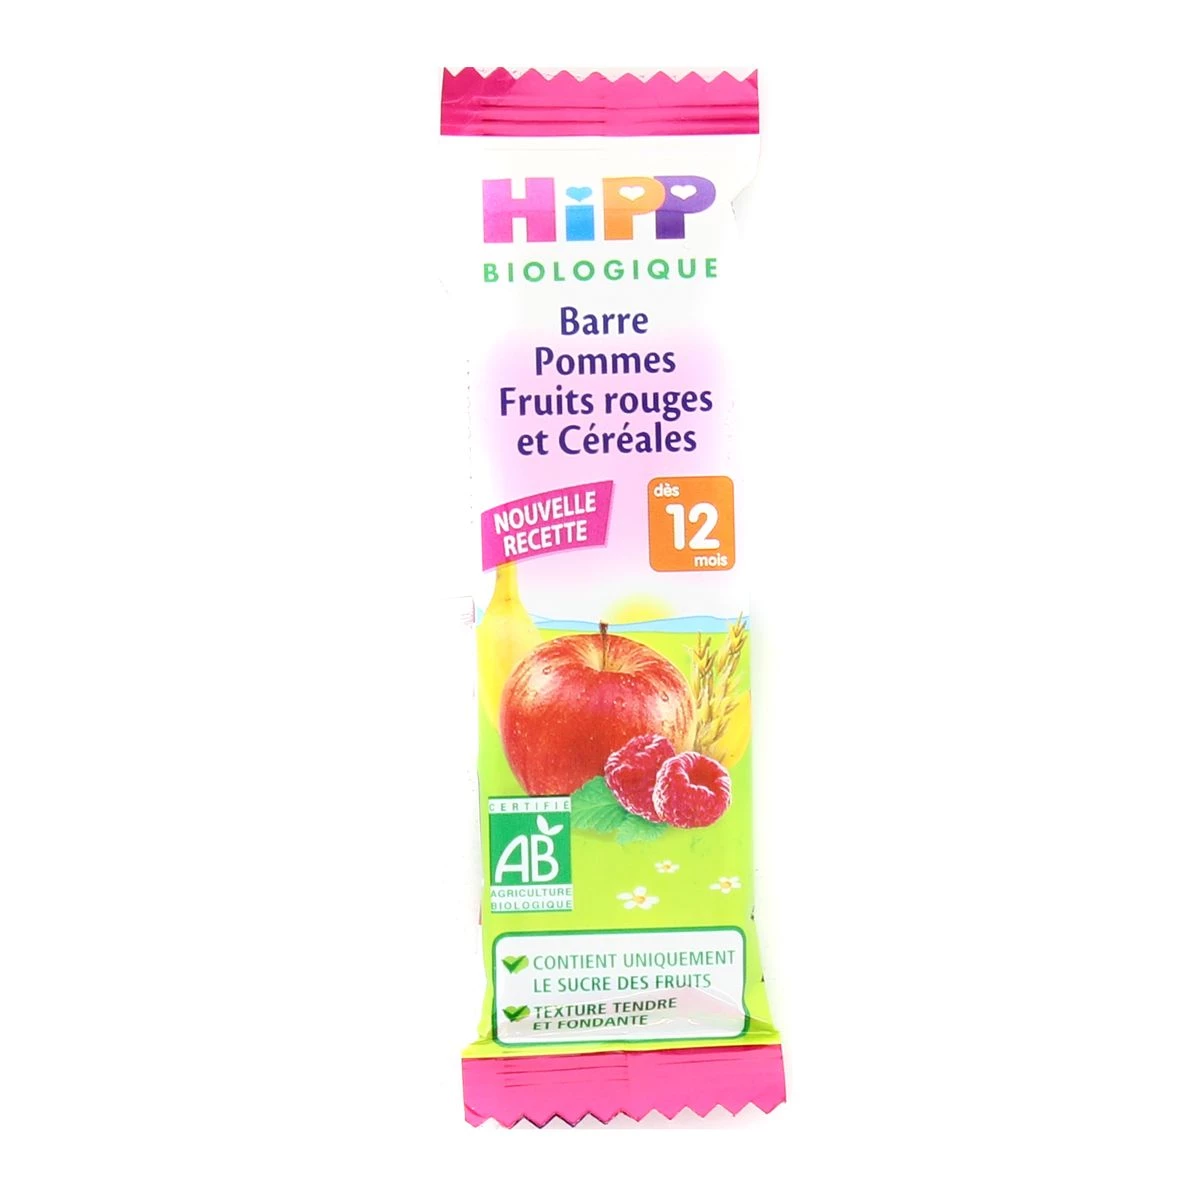 Organic apple/ red fruit/ cereal bar from 12 months 25g - HIPP